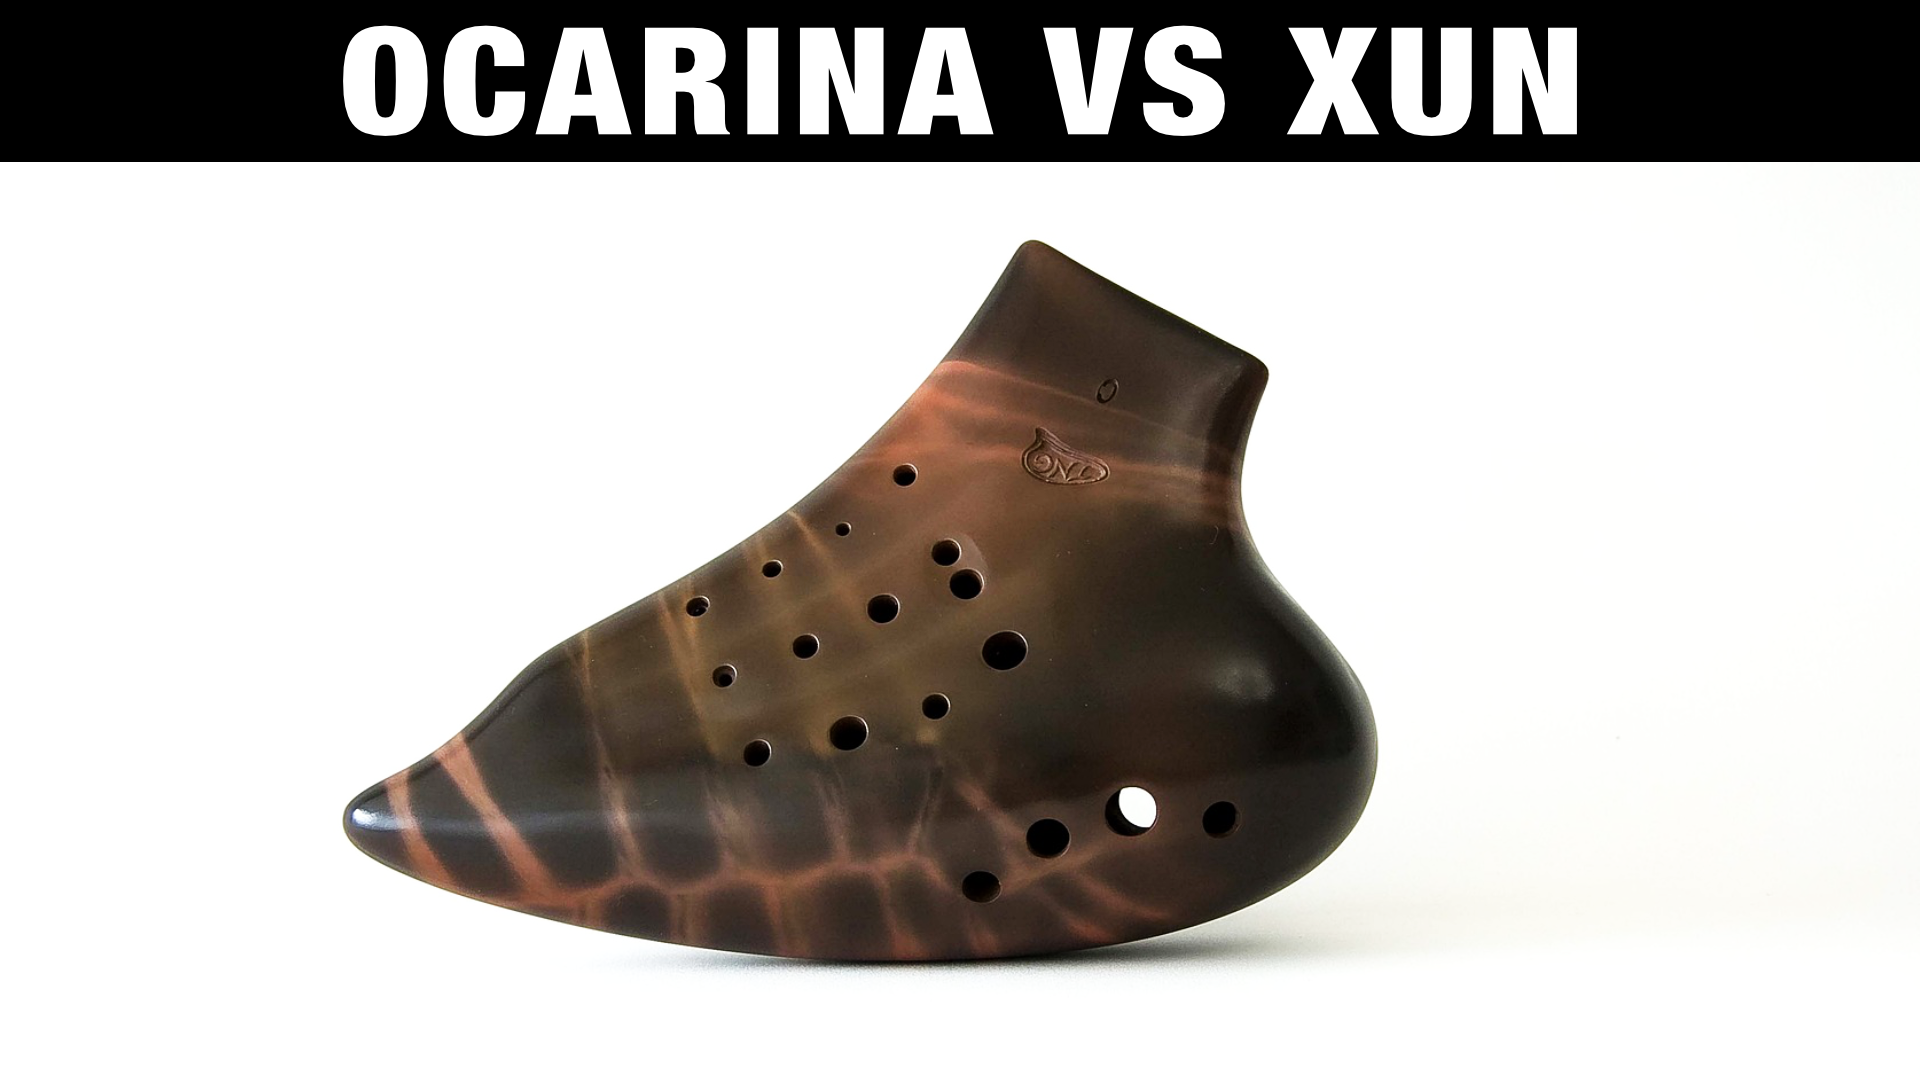 Ocarina vs Xun – What's the Difference? – Professional Composers